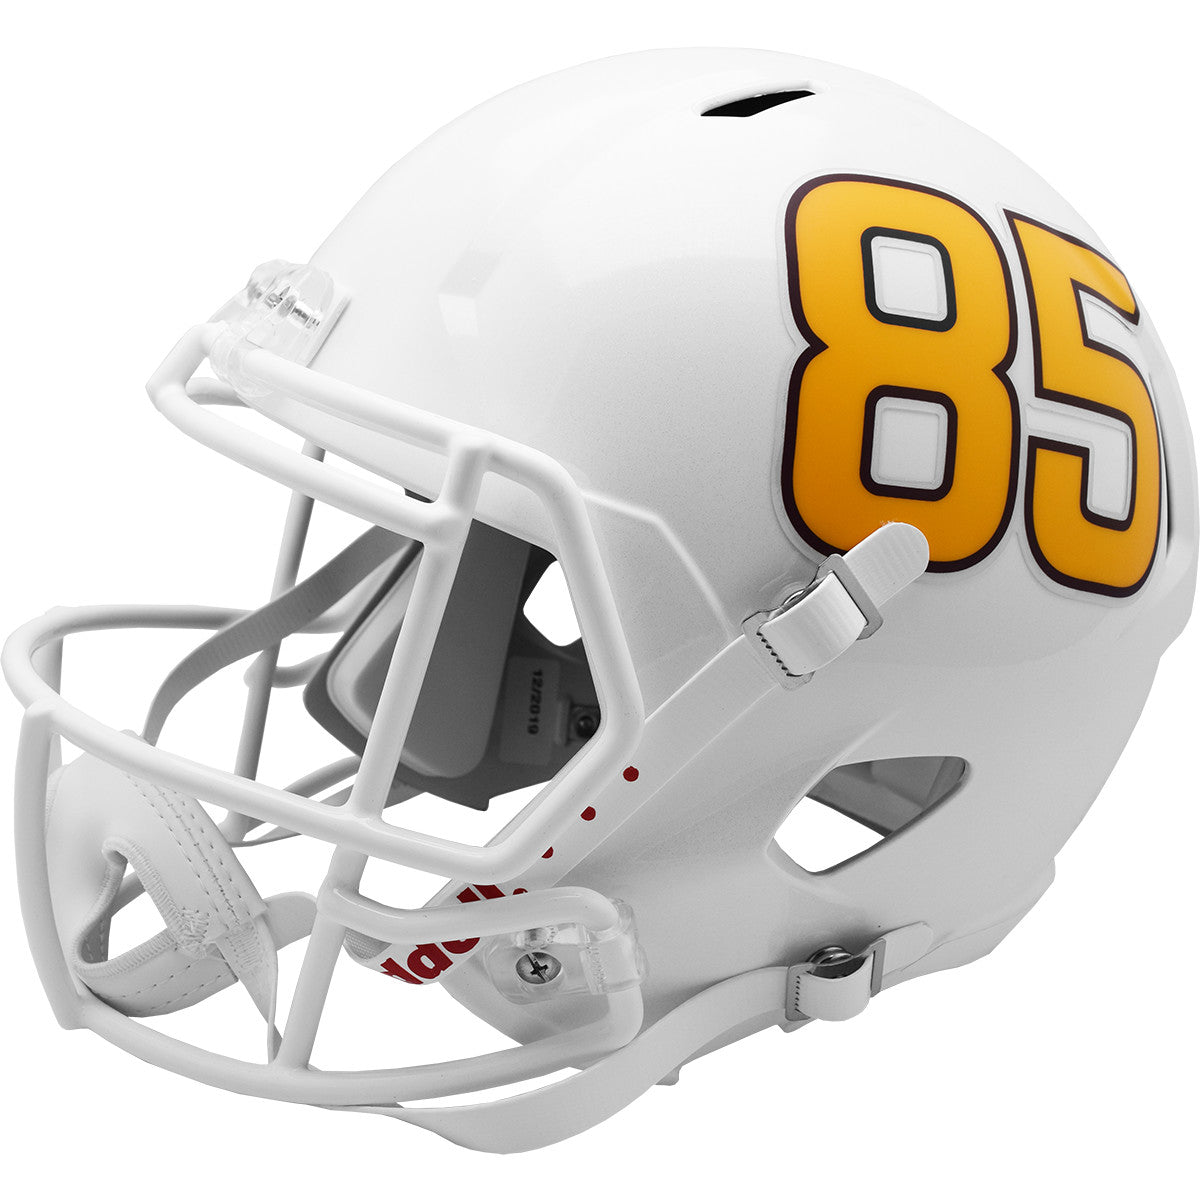 ASU replica football helmet in white with gold '85' on the left side